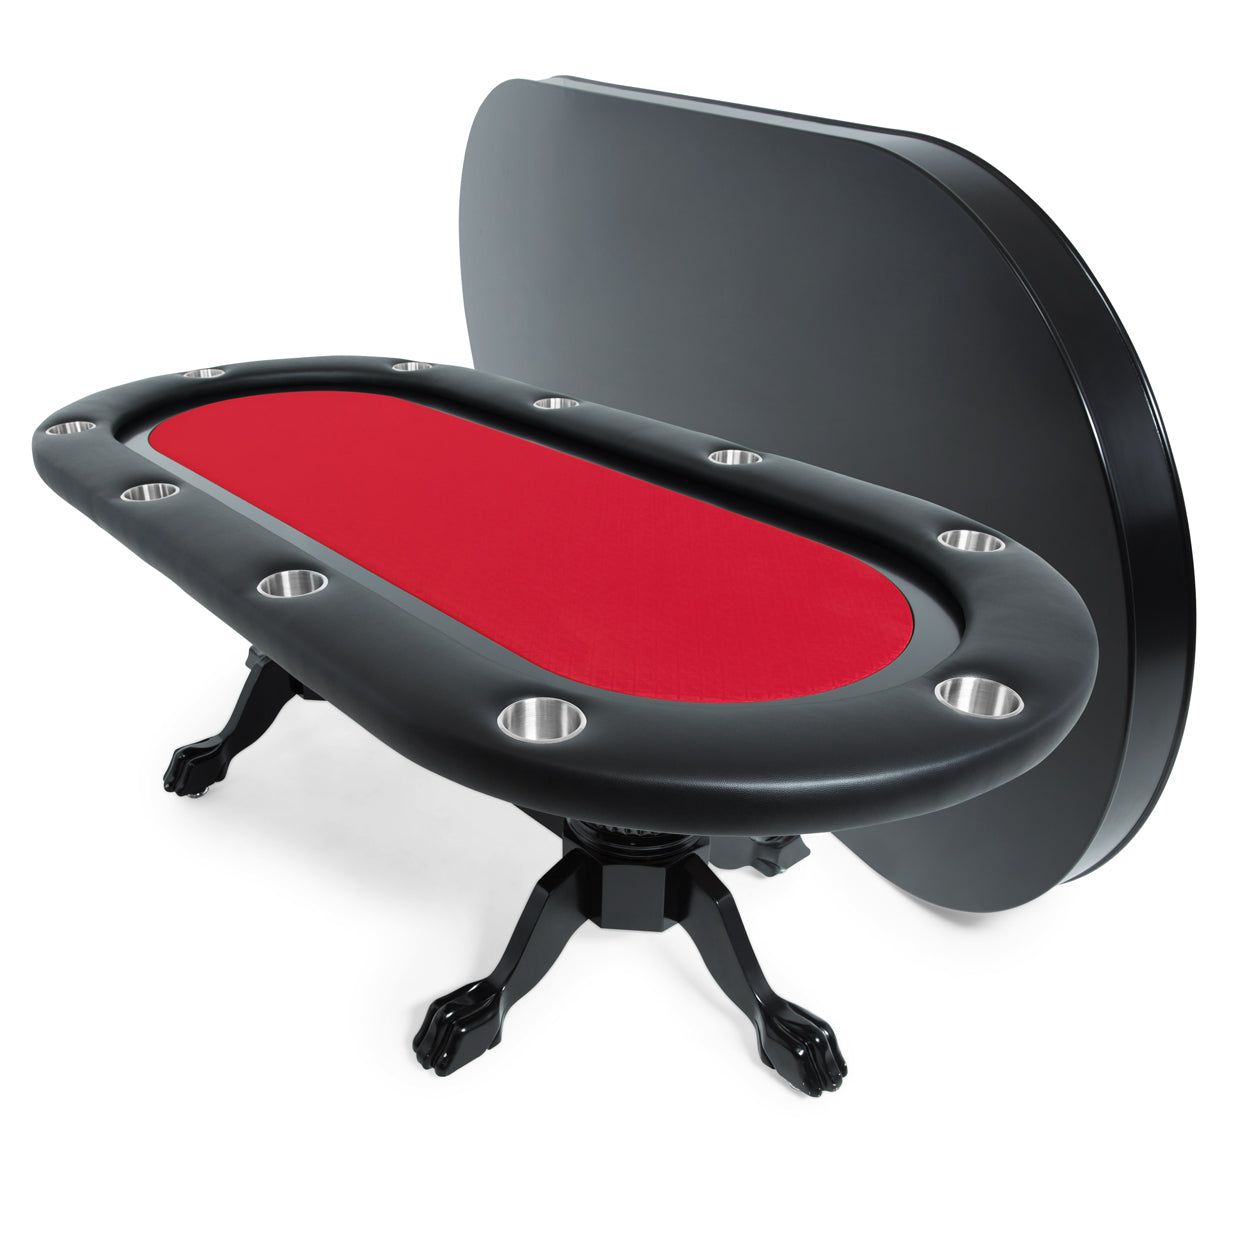 BBO The Elite Premium Poker Table red speedcloth with dining top 